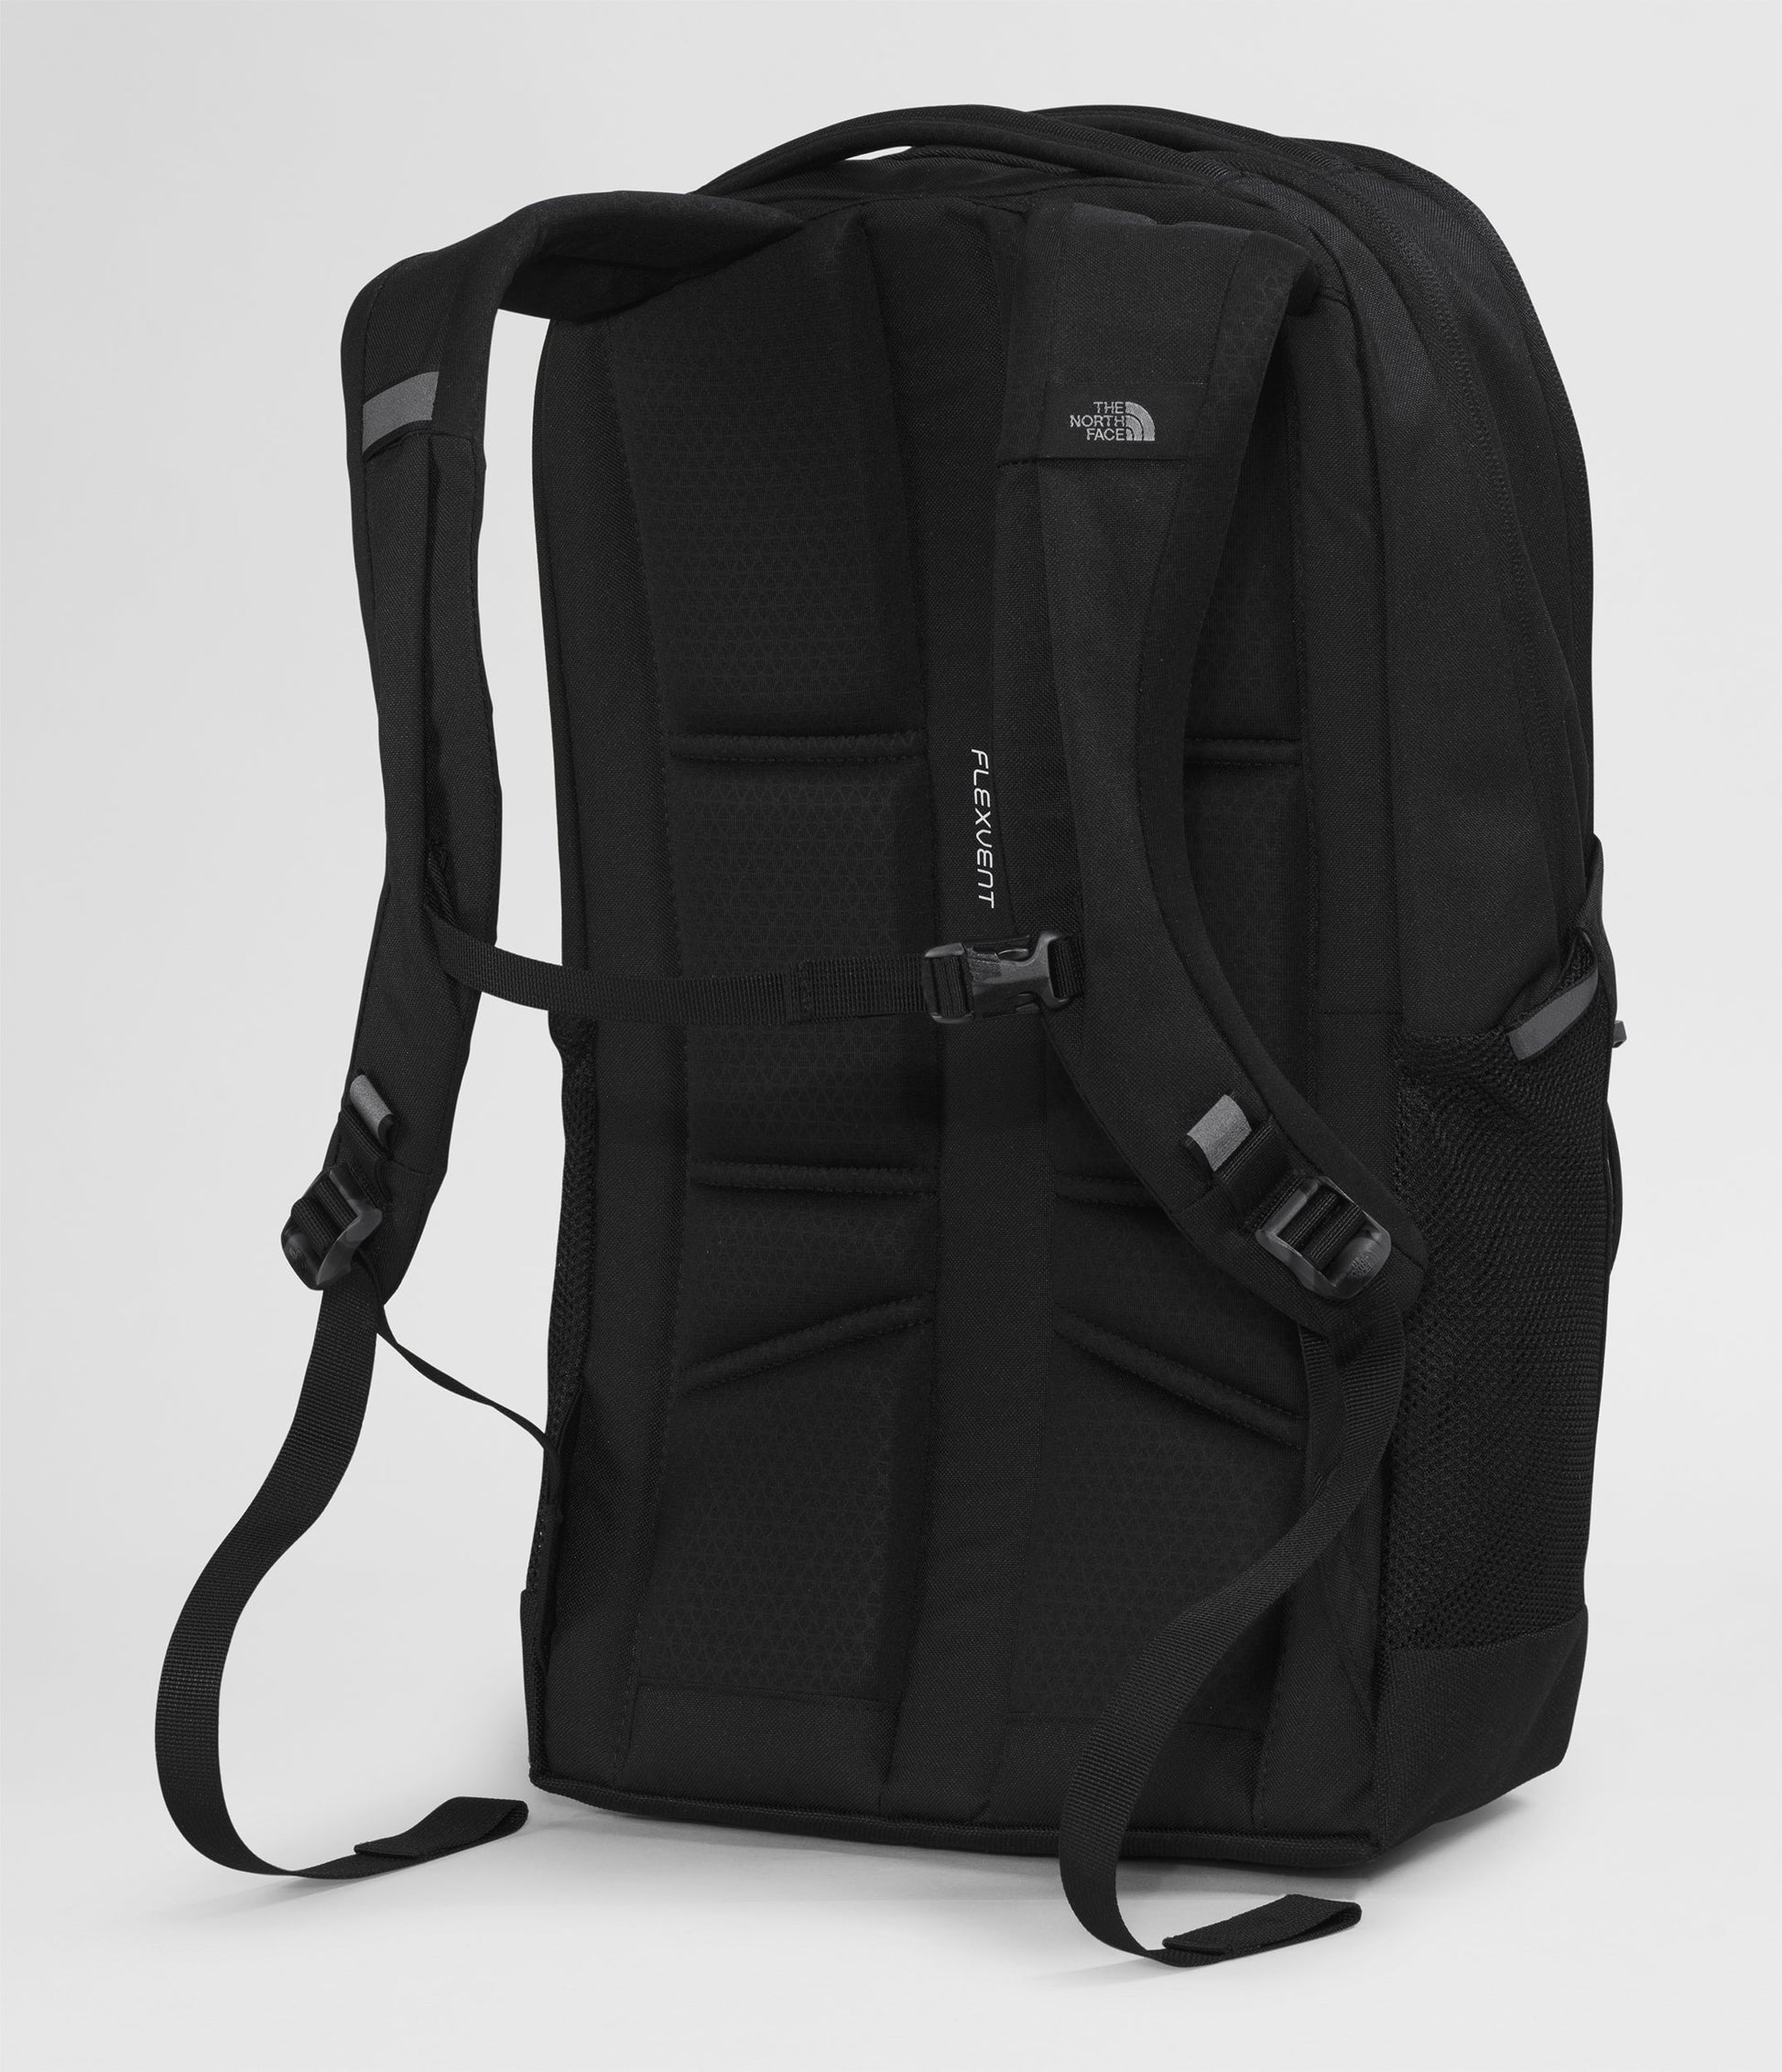 The North Face Women's Jester Luxe Backpack - TNF Black/Burnt Coral Metallic